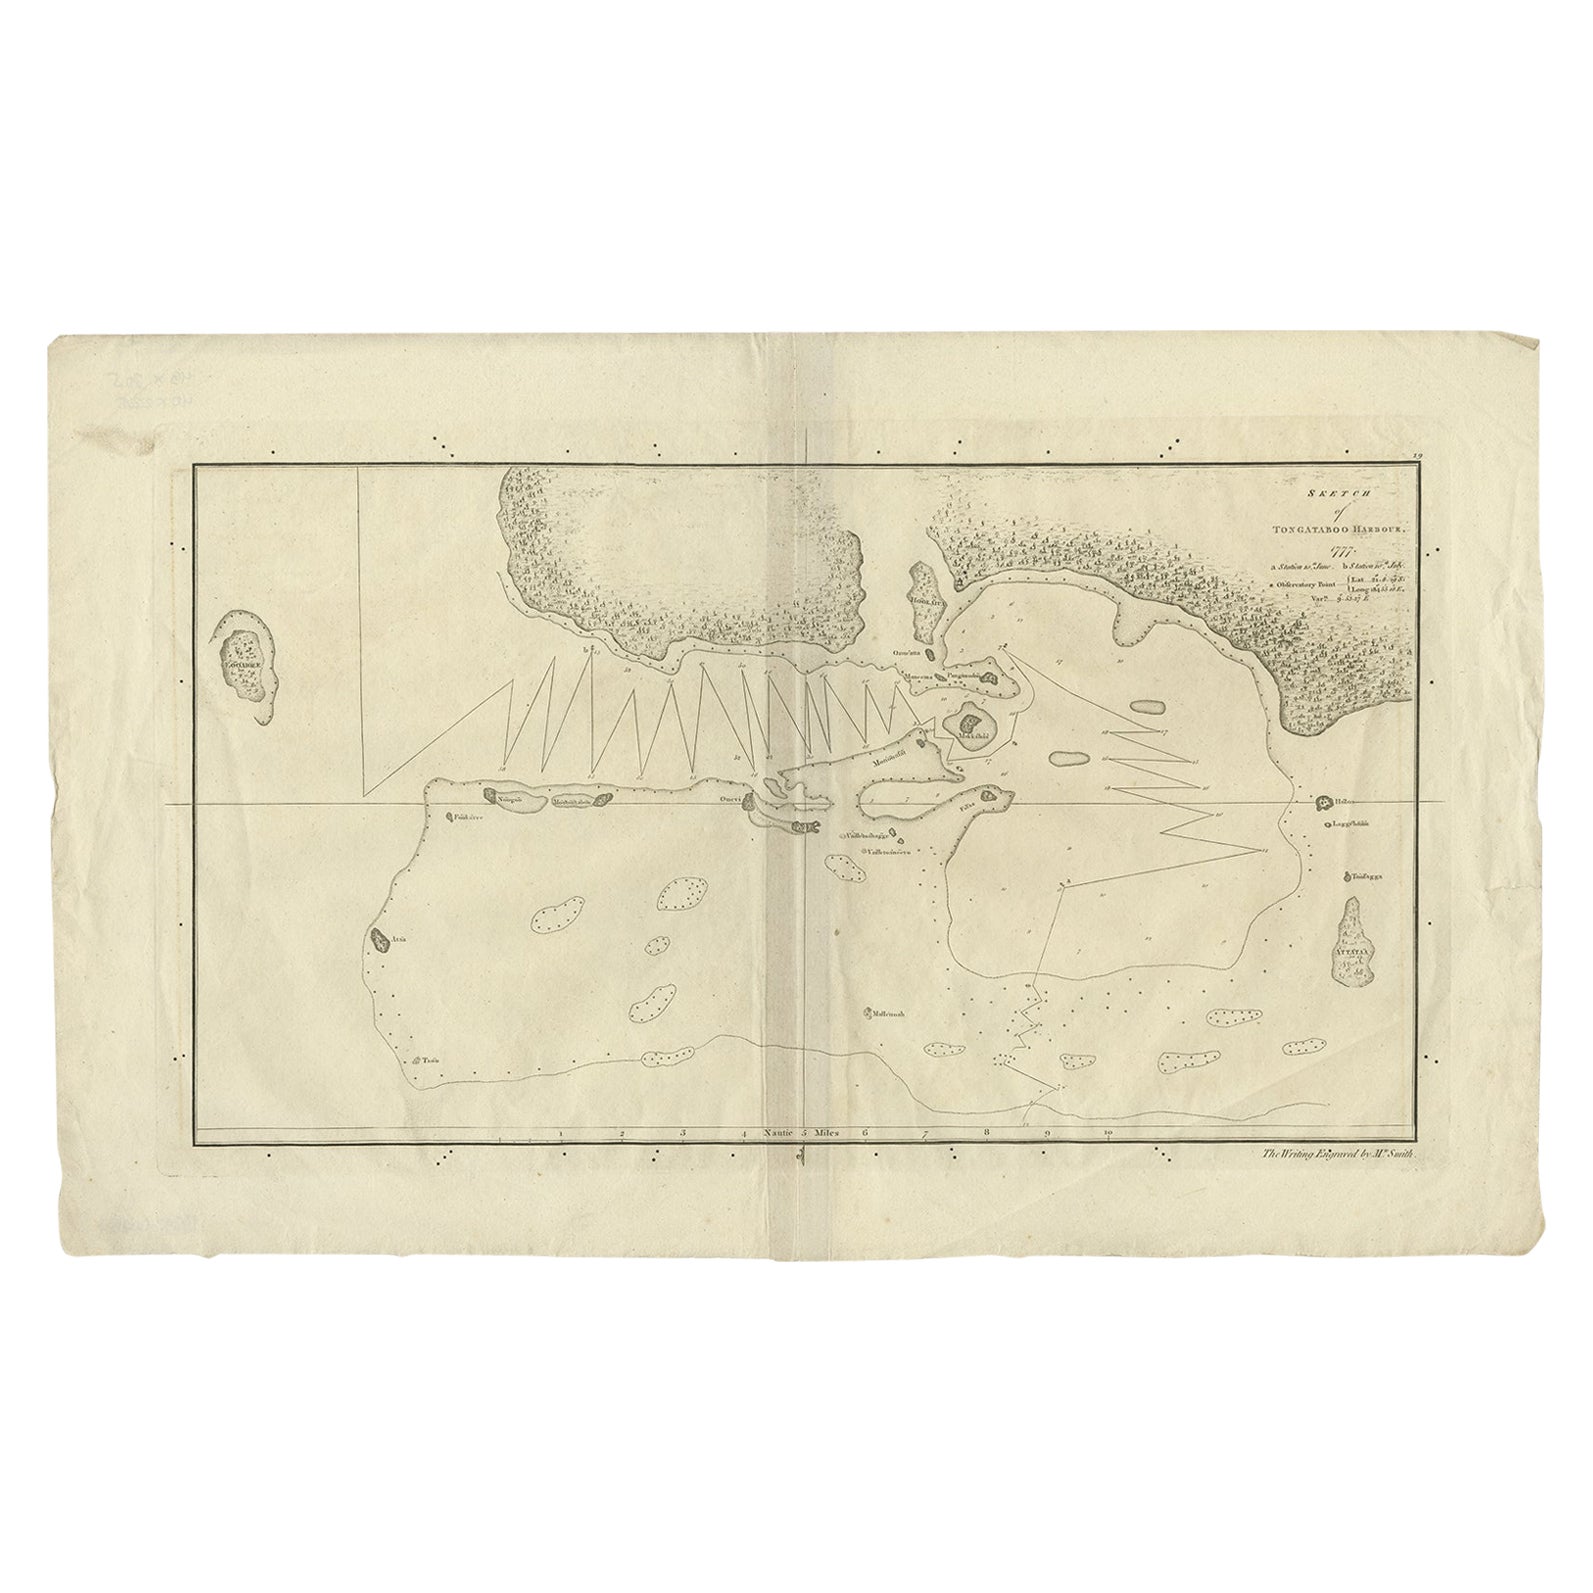 Original Antique Map of the Harbour of Tongatabu by Cook, 1784